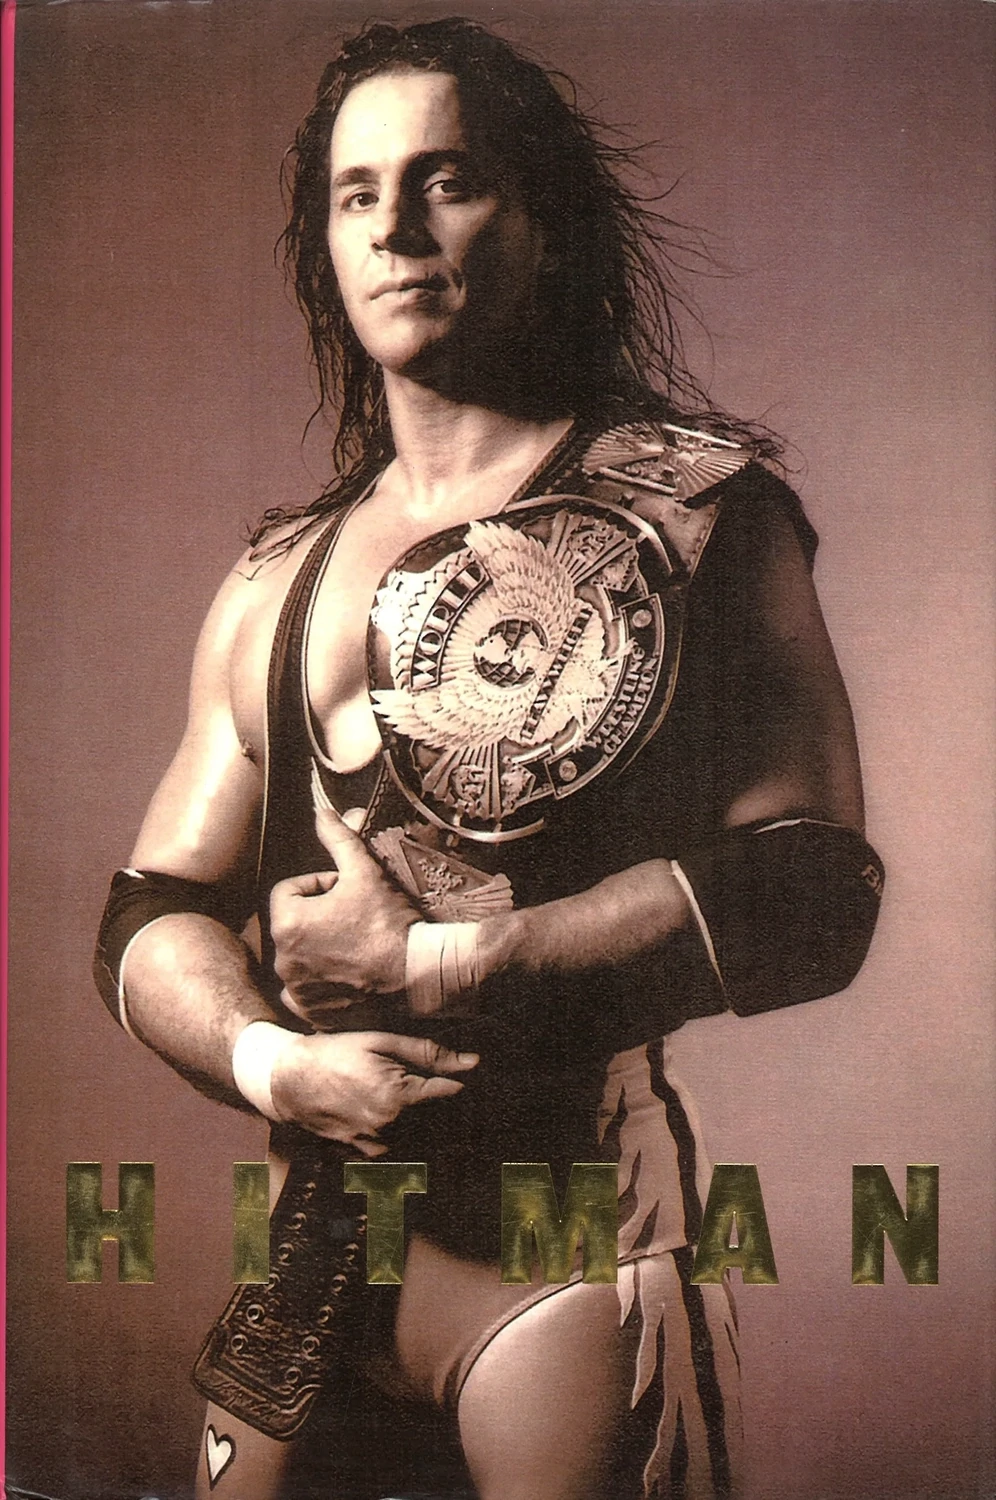 Hitman (Signed) by Bret Hart